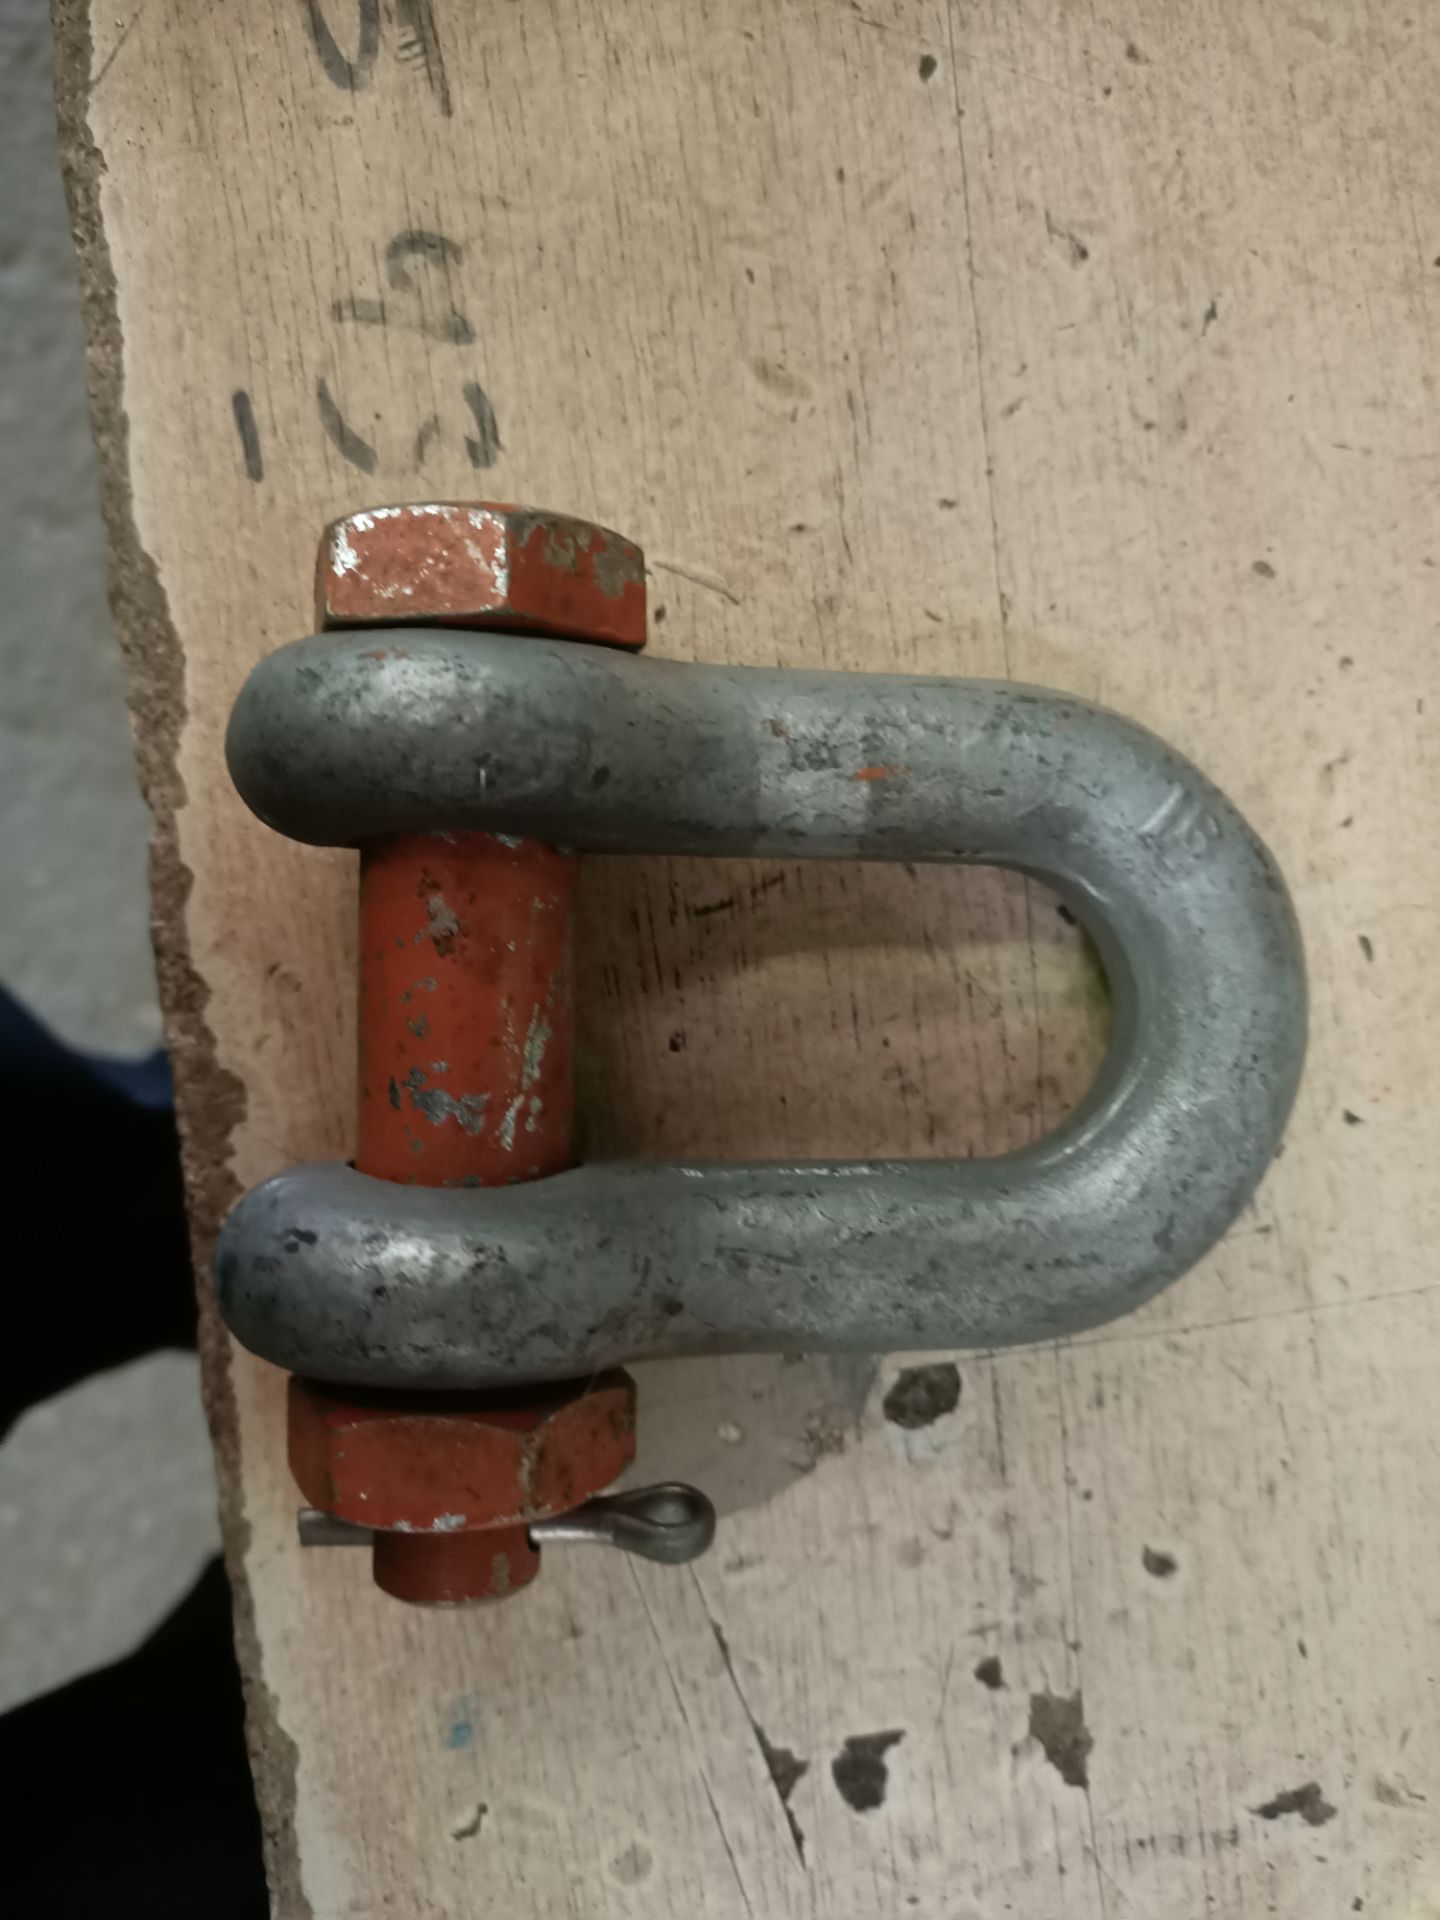 4 X 8.5 Ton Orange Pin Safety Dee Shackles (Opsad8.5) - Image 2 of 2